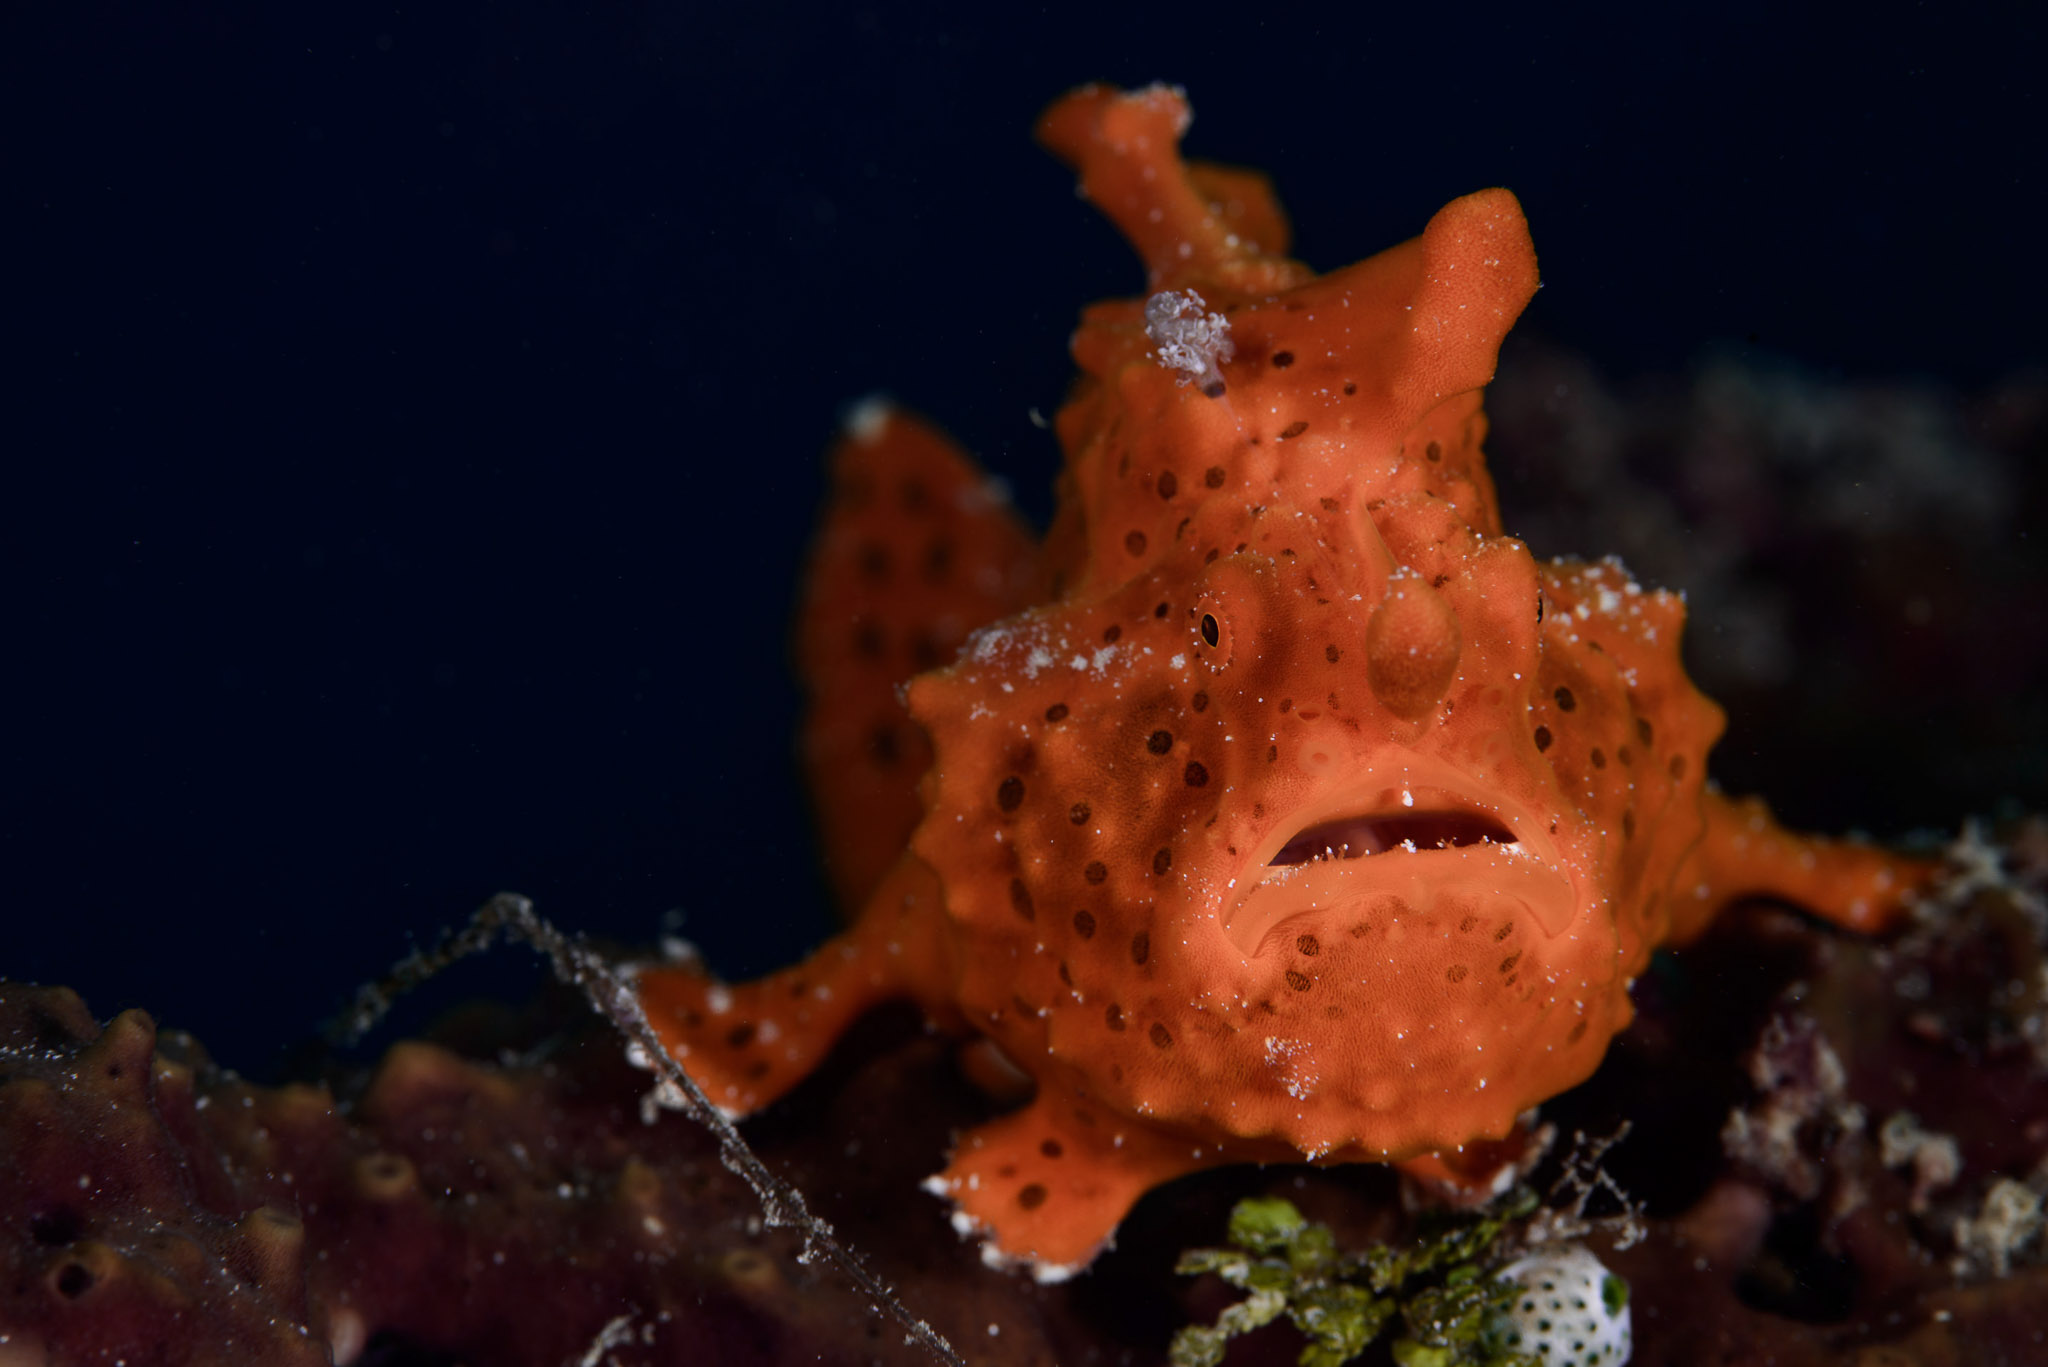 Frogfish in Indonesia